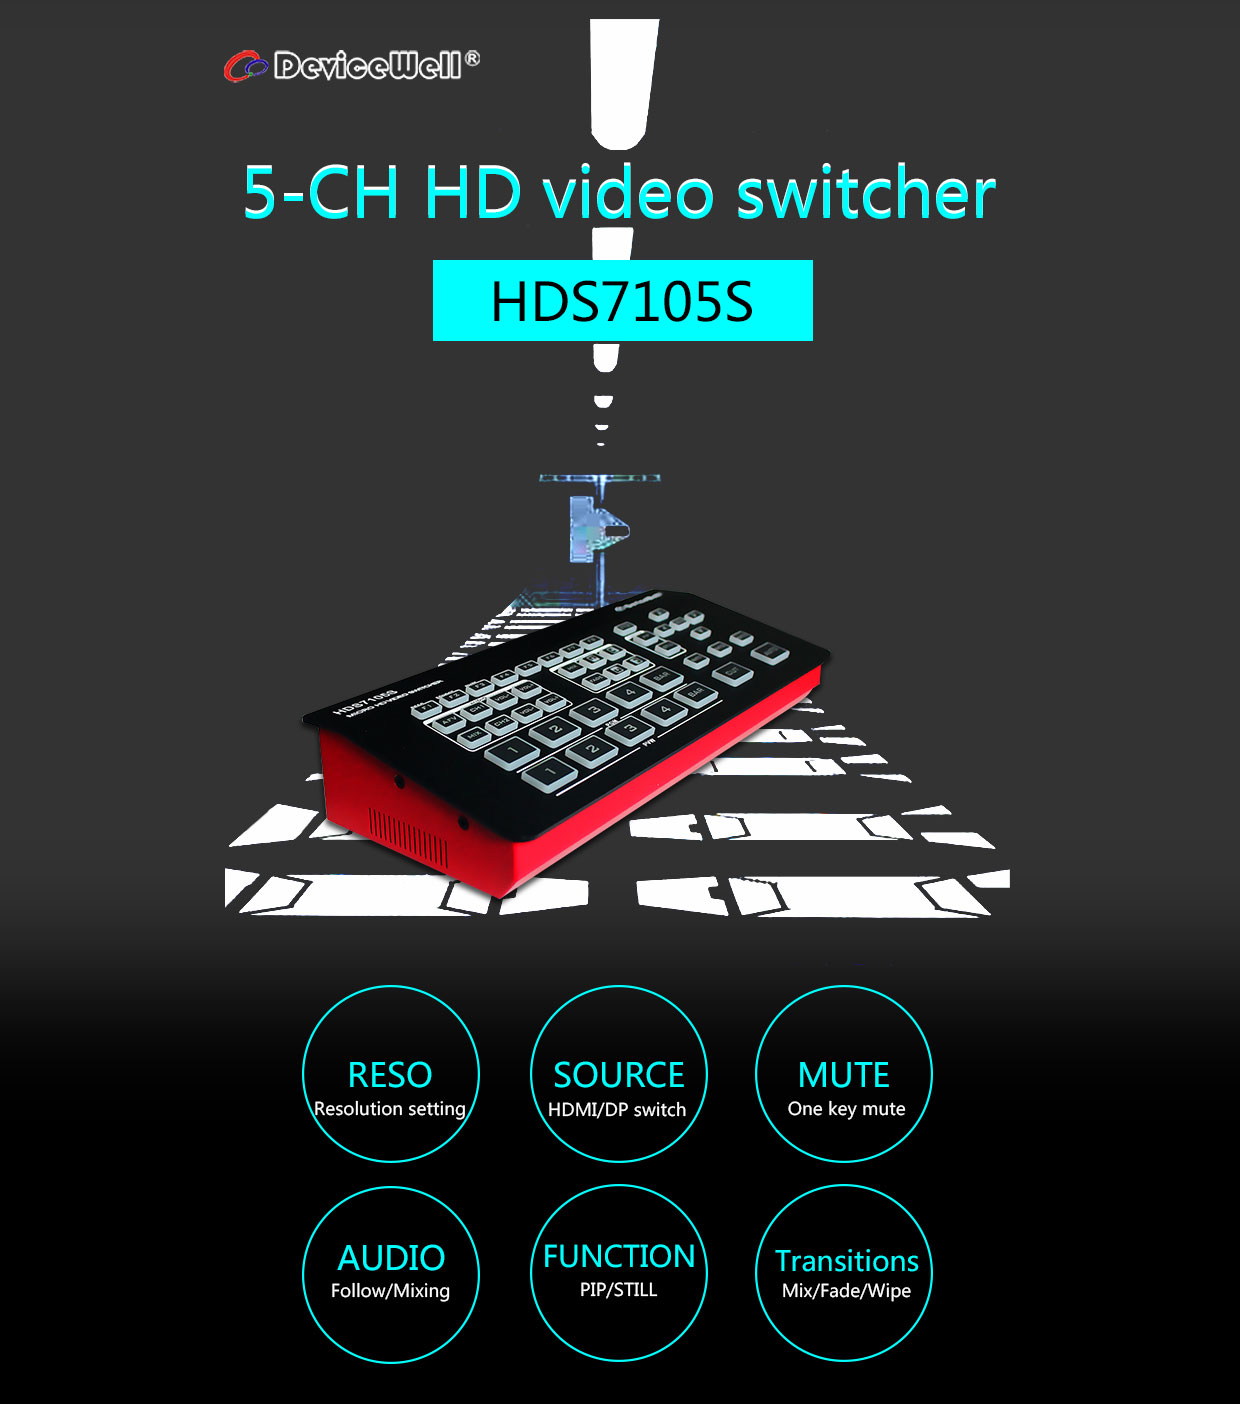 devicewell-HDS7105S-01